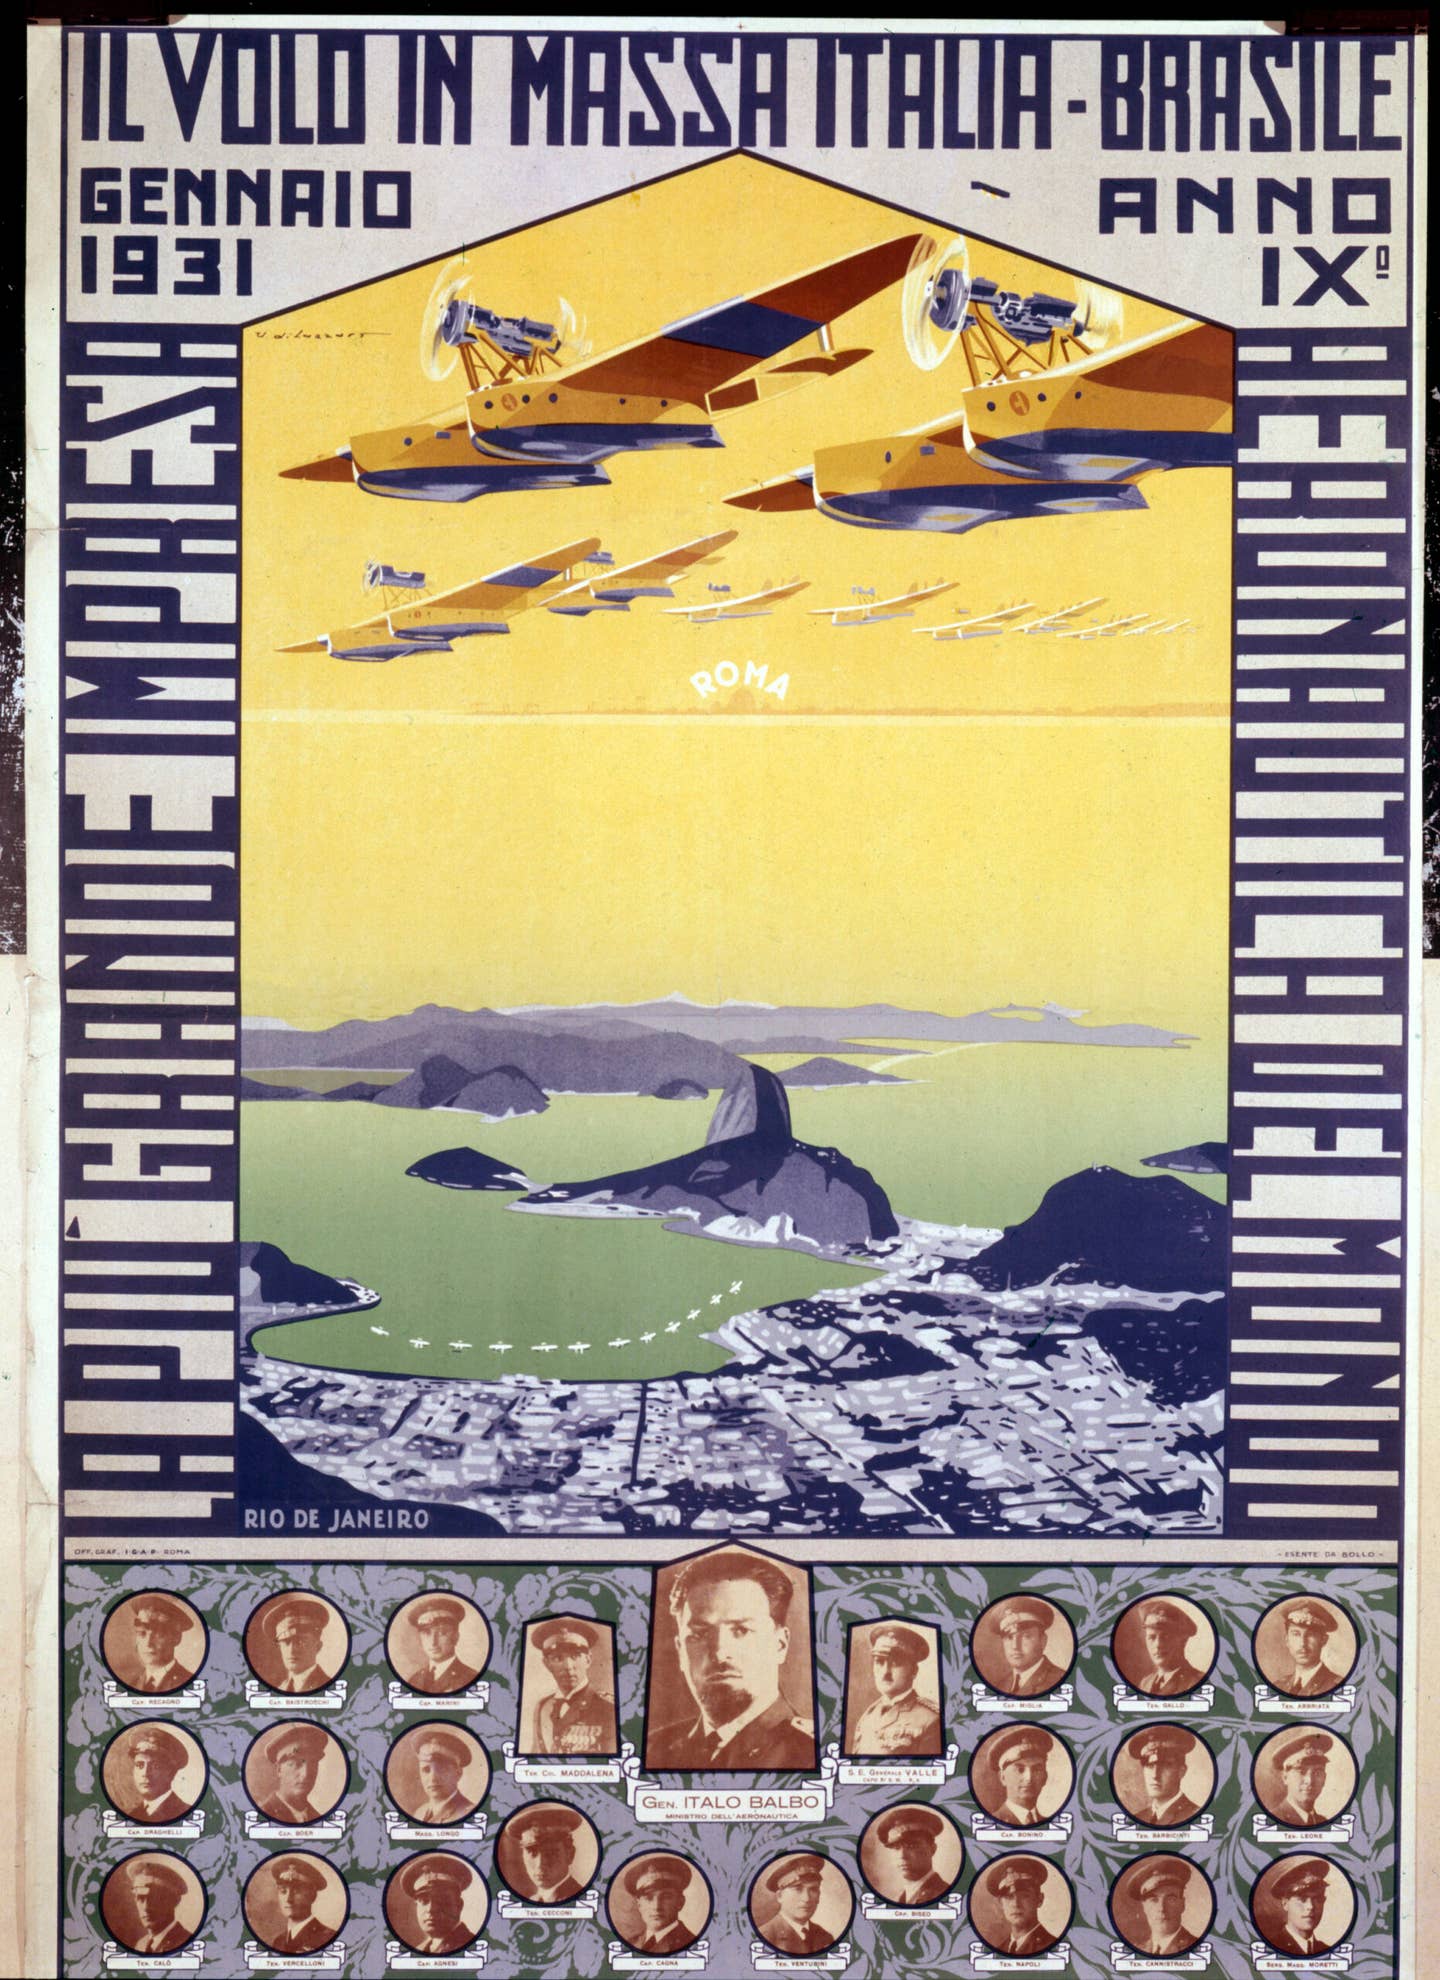 A commemorative poster of the 1930–31 transatlantic flight from Italy to Brazil, performed with Savoia-Marchetti S.55 seaplanes, below a portrait of Italo Balbo and the participants in the flight. P<em>hoto by De Agostini Picture Library via Getty Images</em>